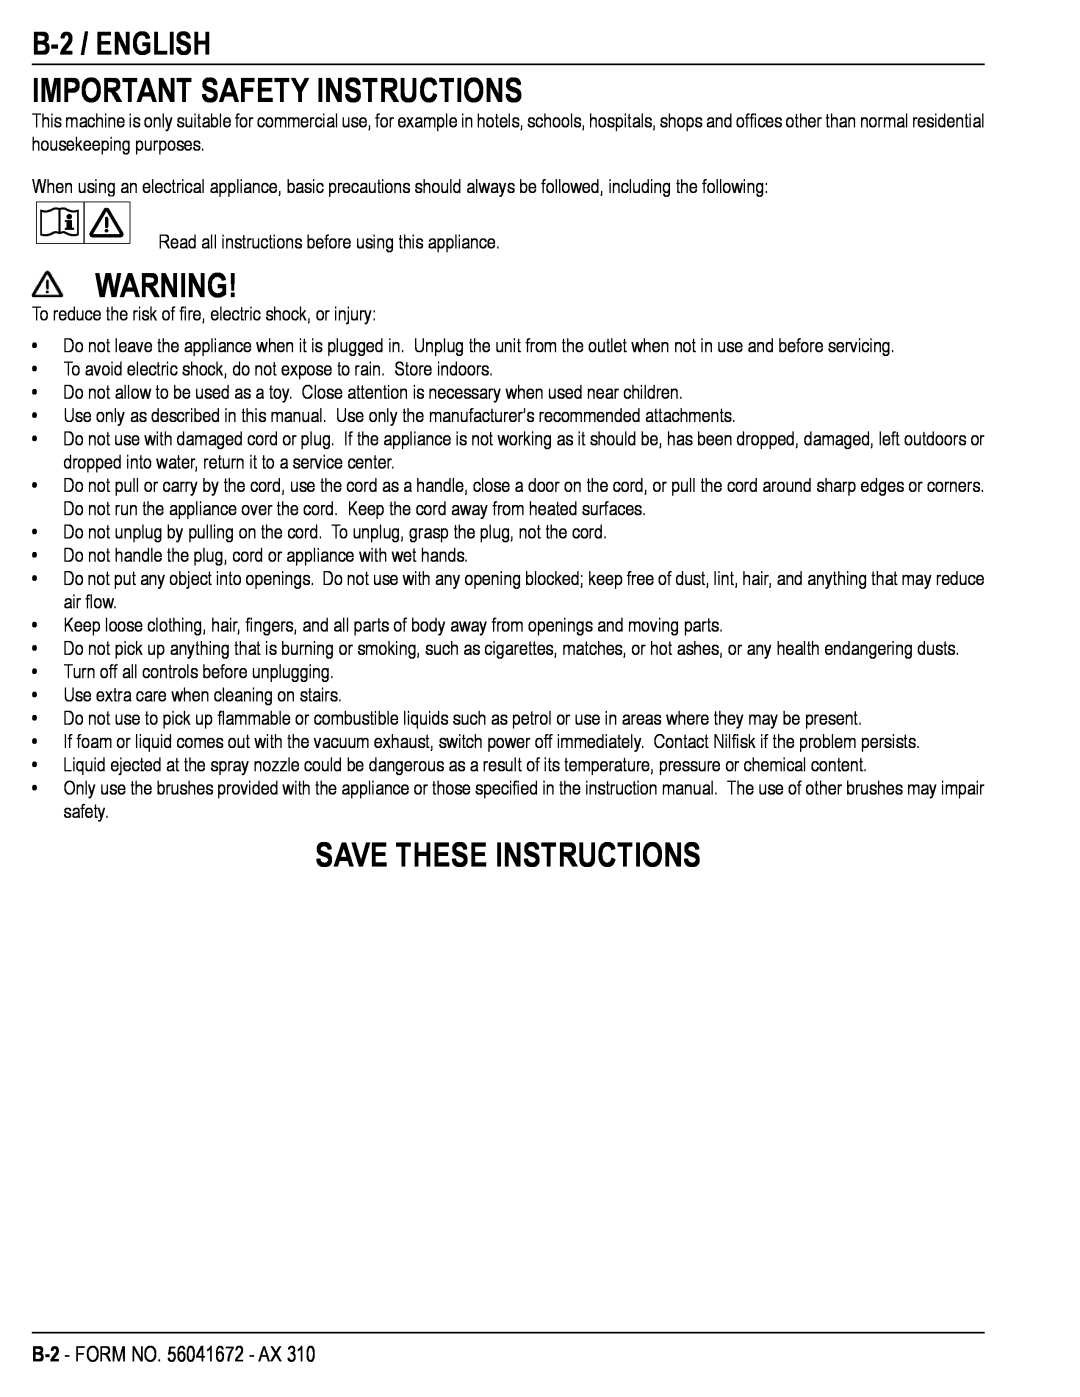 Nilfisk-Advance America AX 310 manual Important Safety Instructions, Save These Instructions, B-2 /ENGLISH 